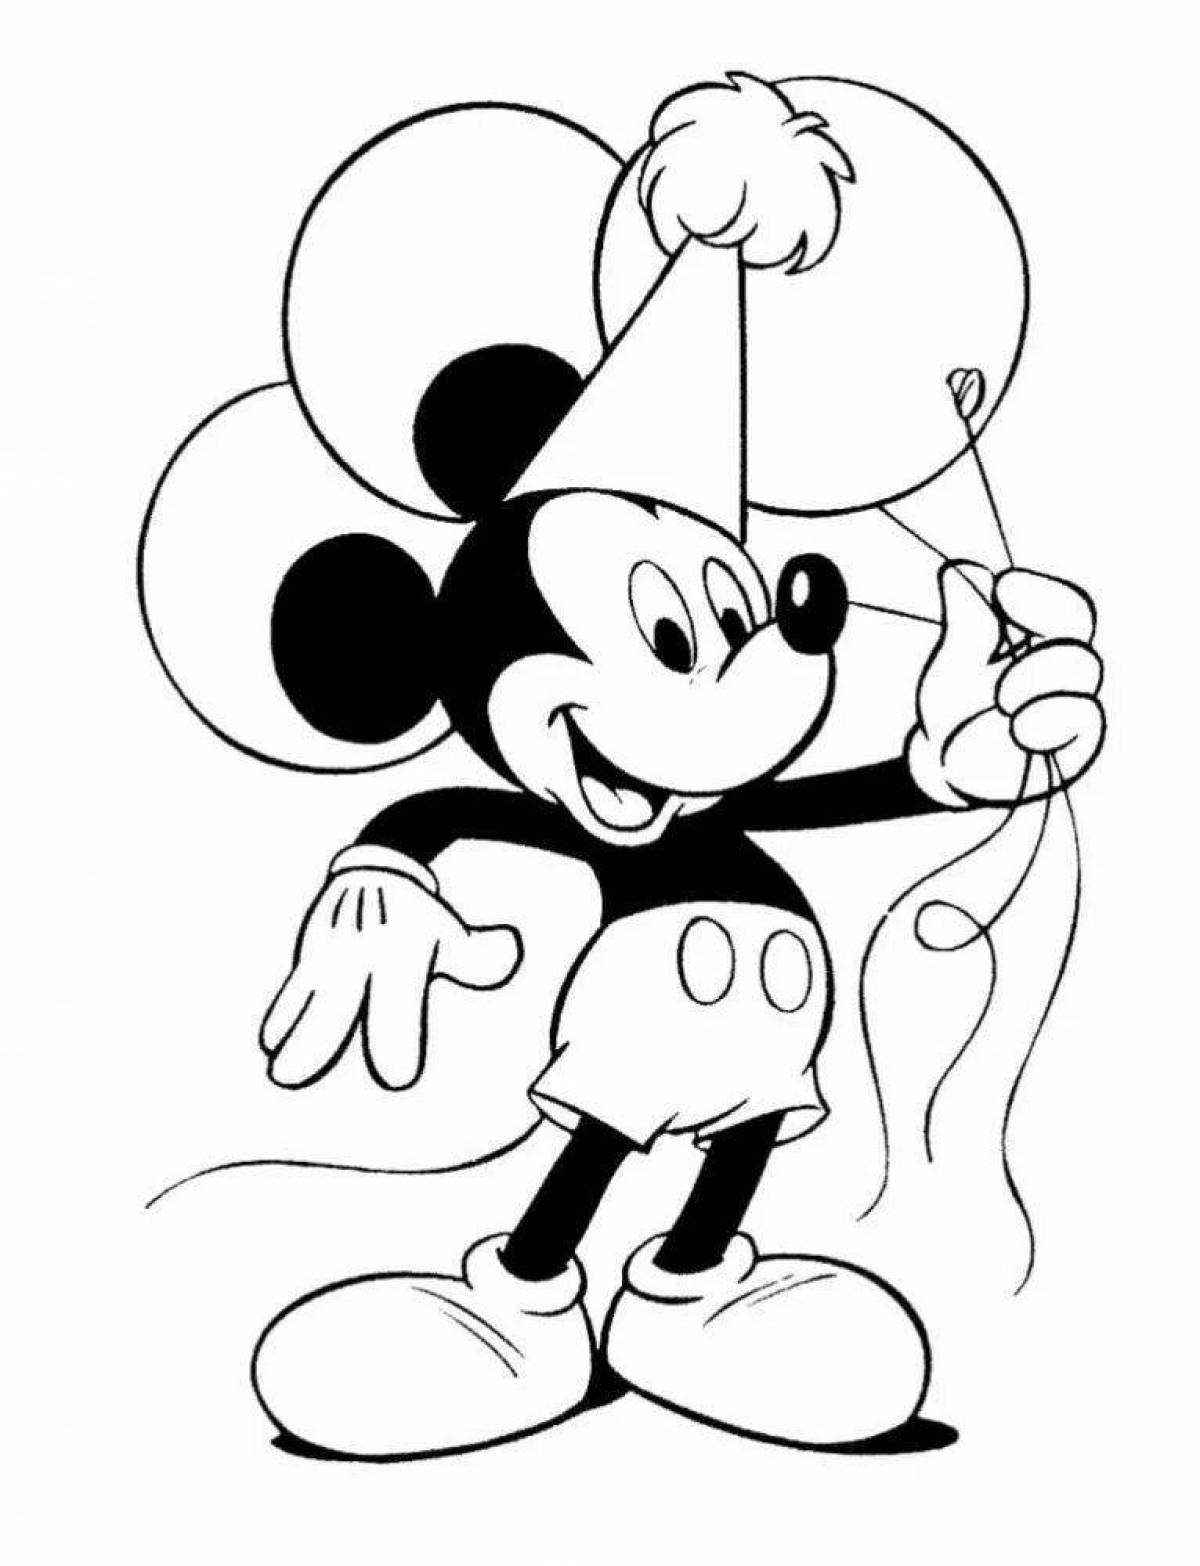 Mickey's fairy tale coloring book